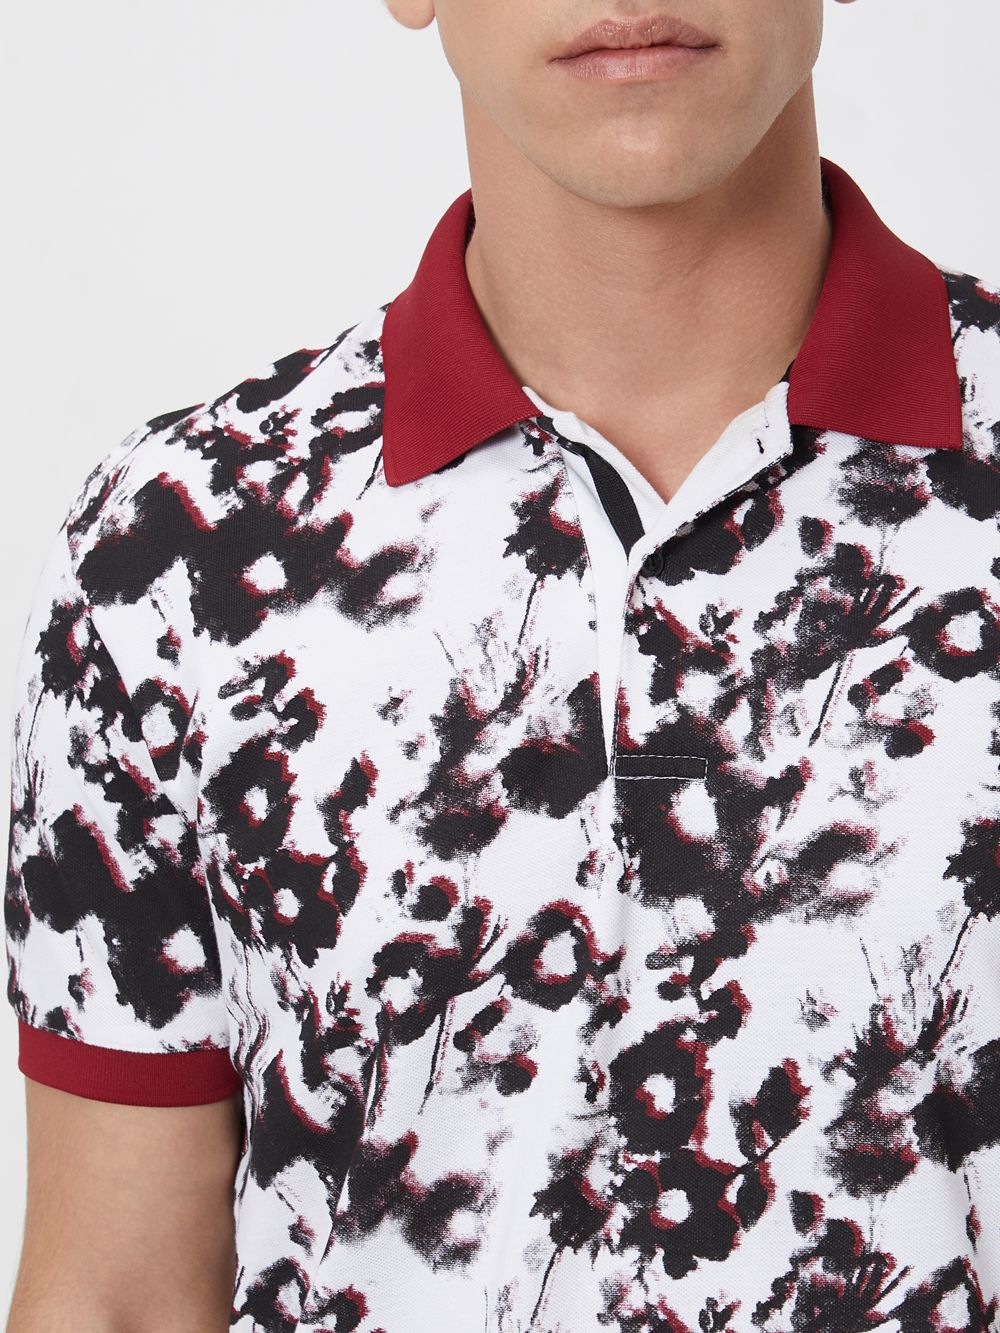 White Floral Print Slim Fit Casual Polo